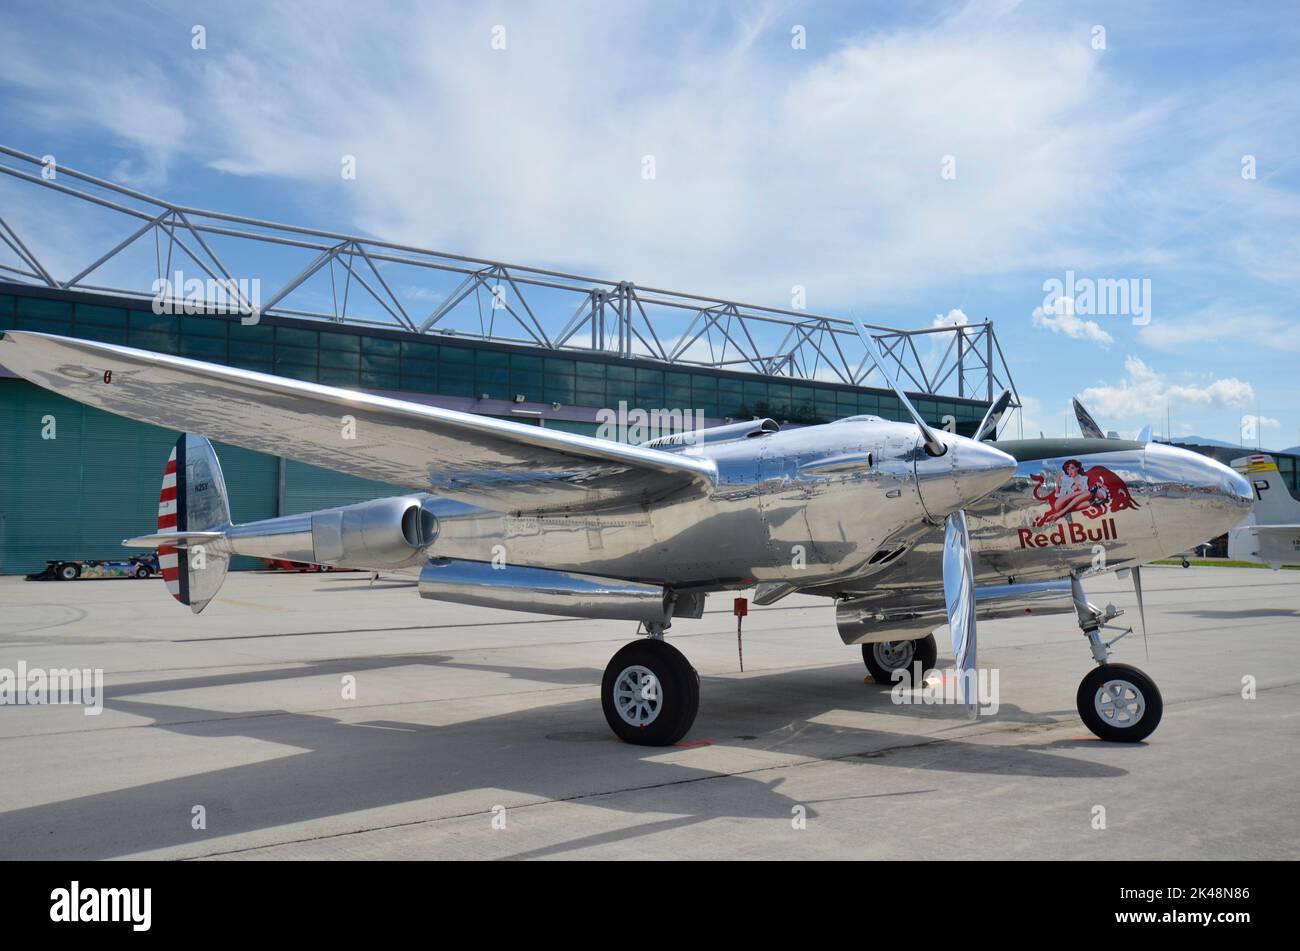 Zeltweg, Austria - September 03, 2022: Public airshow in Styria named Airpower 22, Lockheed P-38 Lightning a former WWII fighter plane Stock Photo